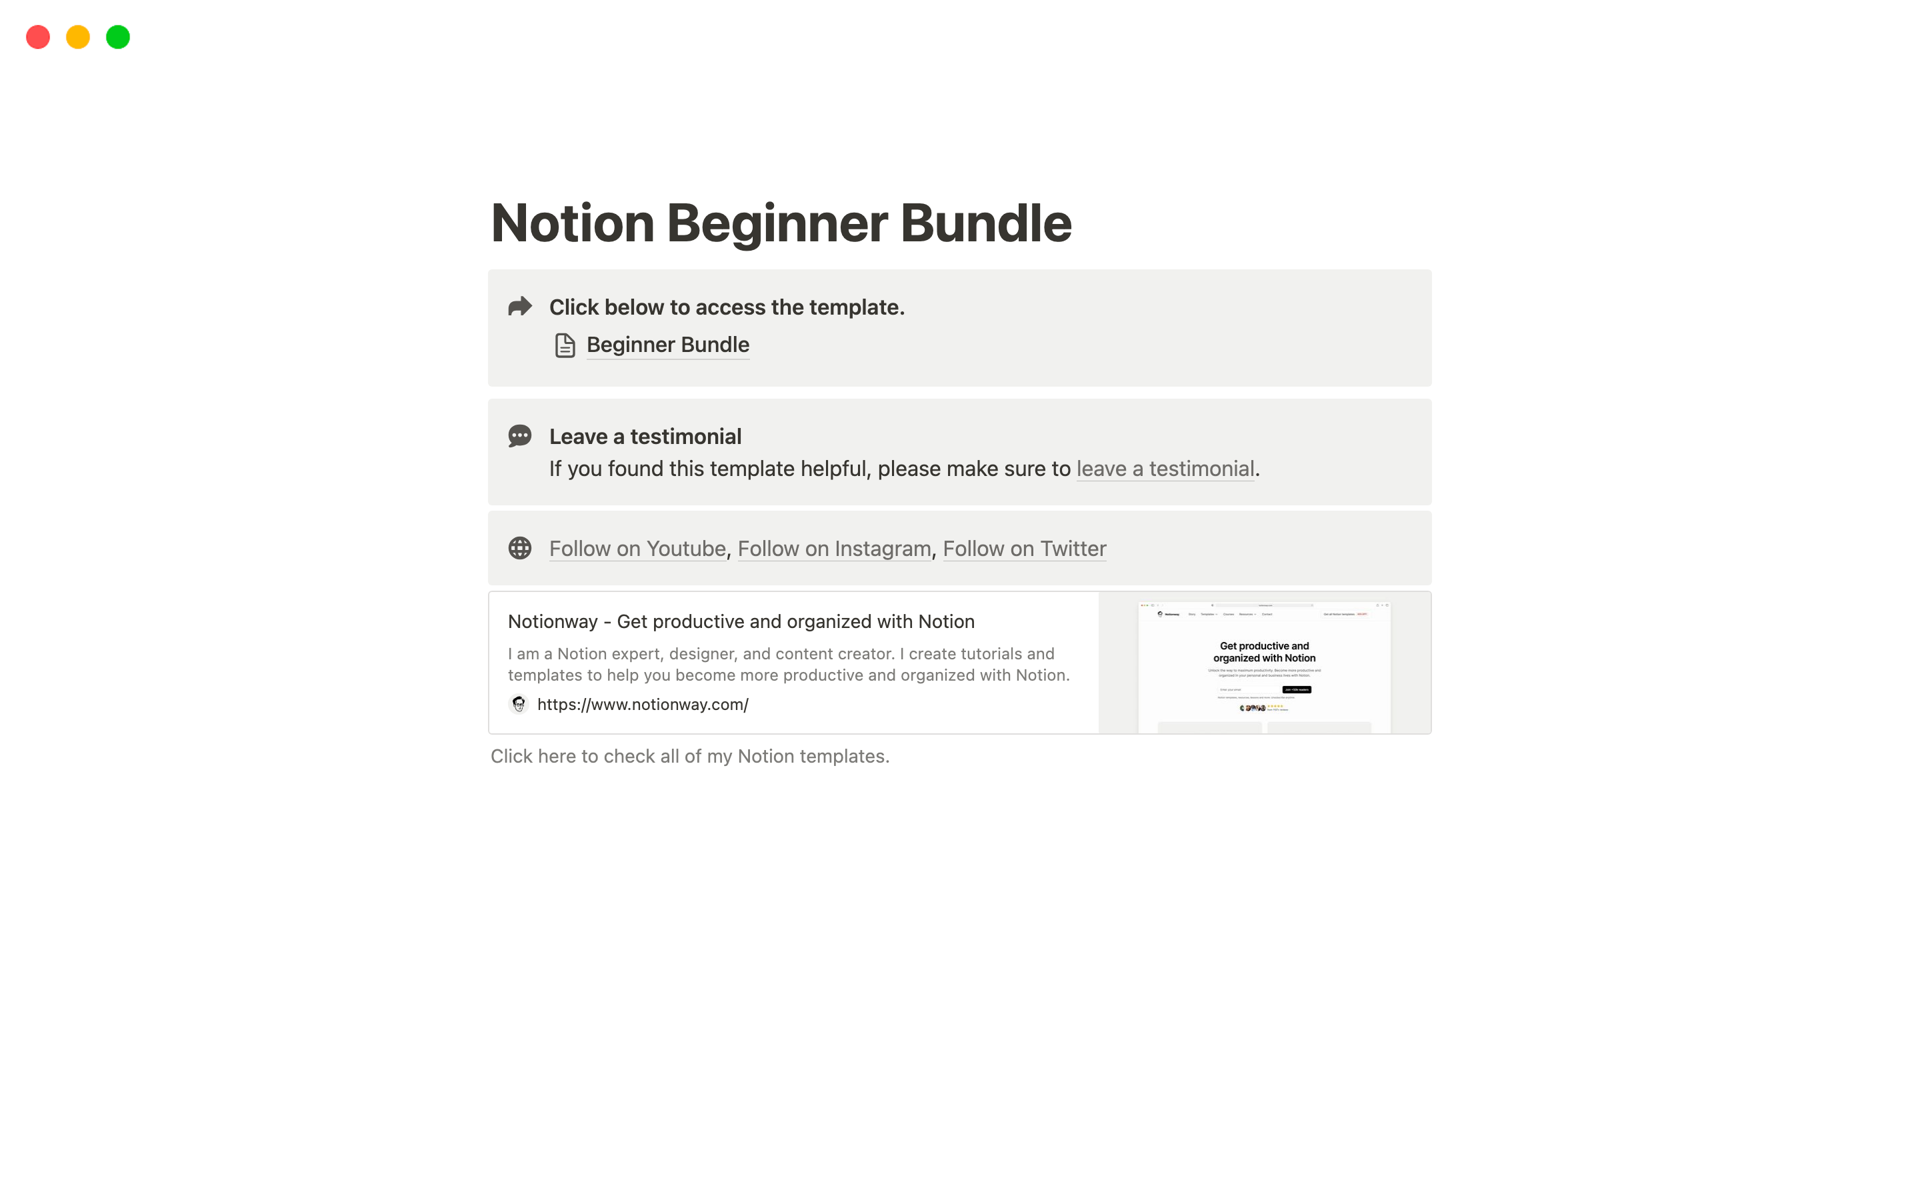 Start your Notion journey with a collection of 10 beginner templates.